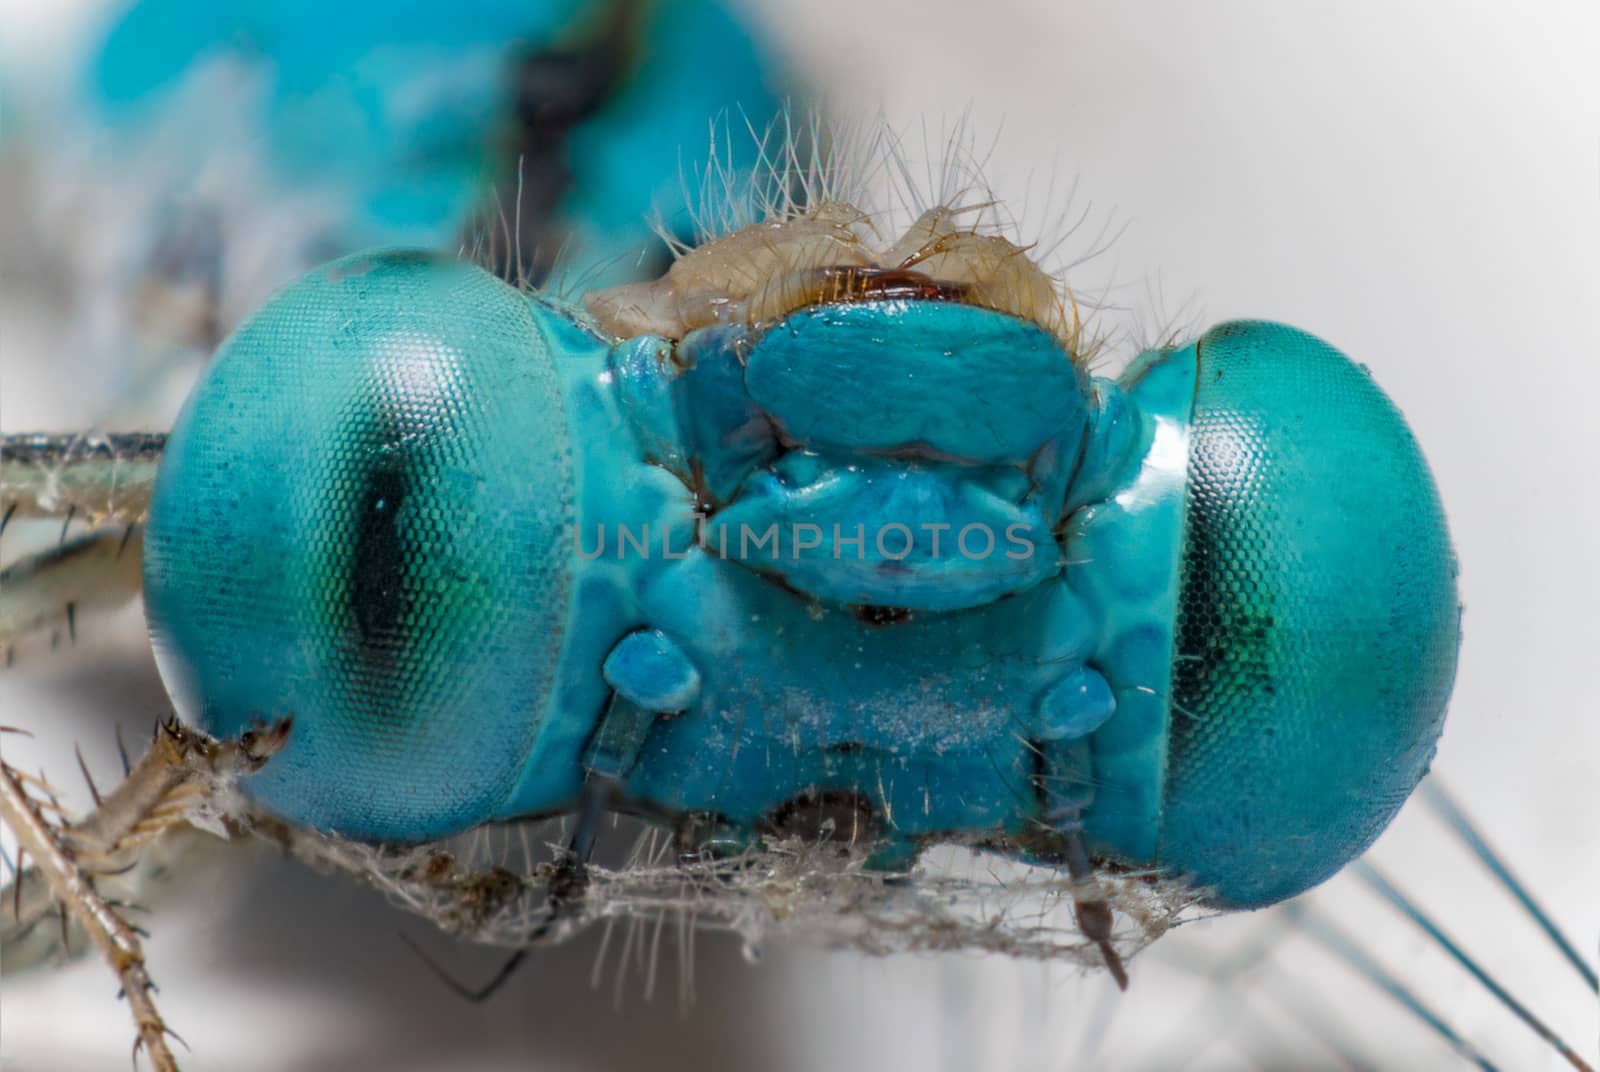 The Beautiful blue eyes dragonfly 
(Focus eyes faces)